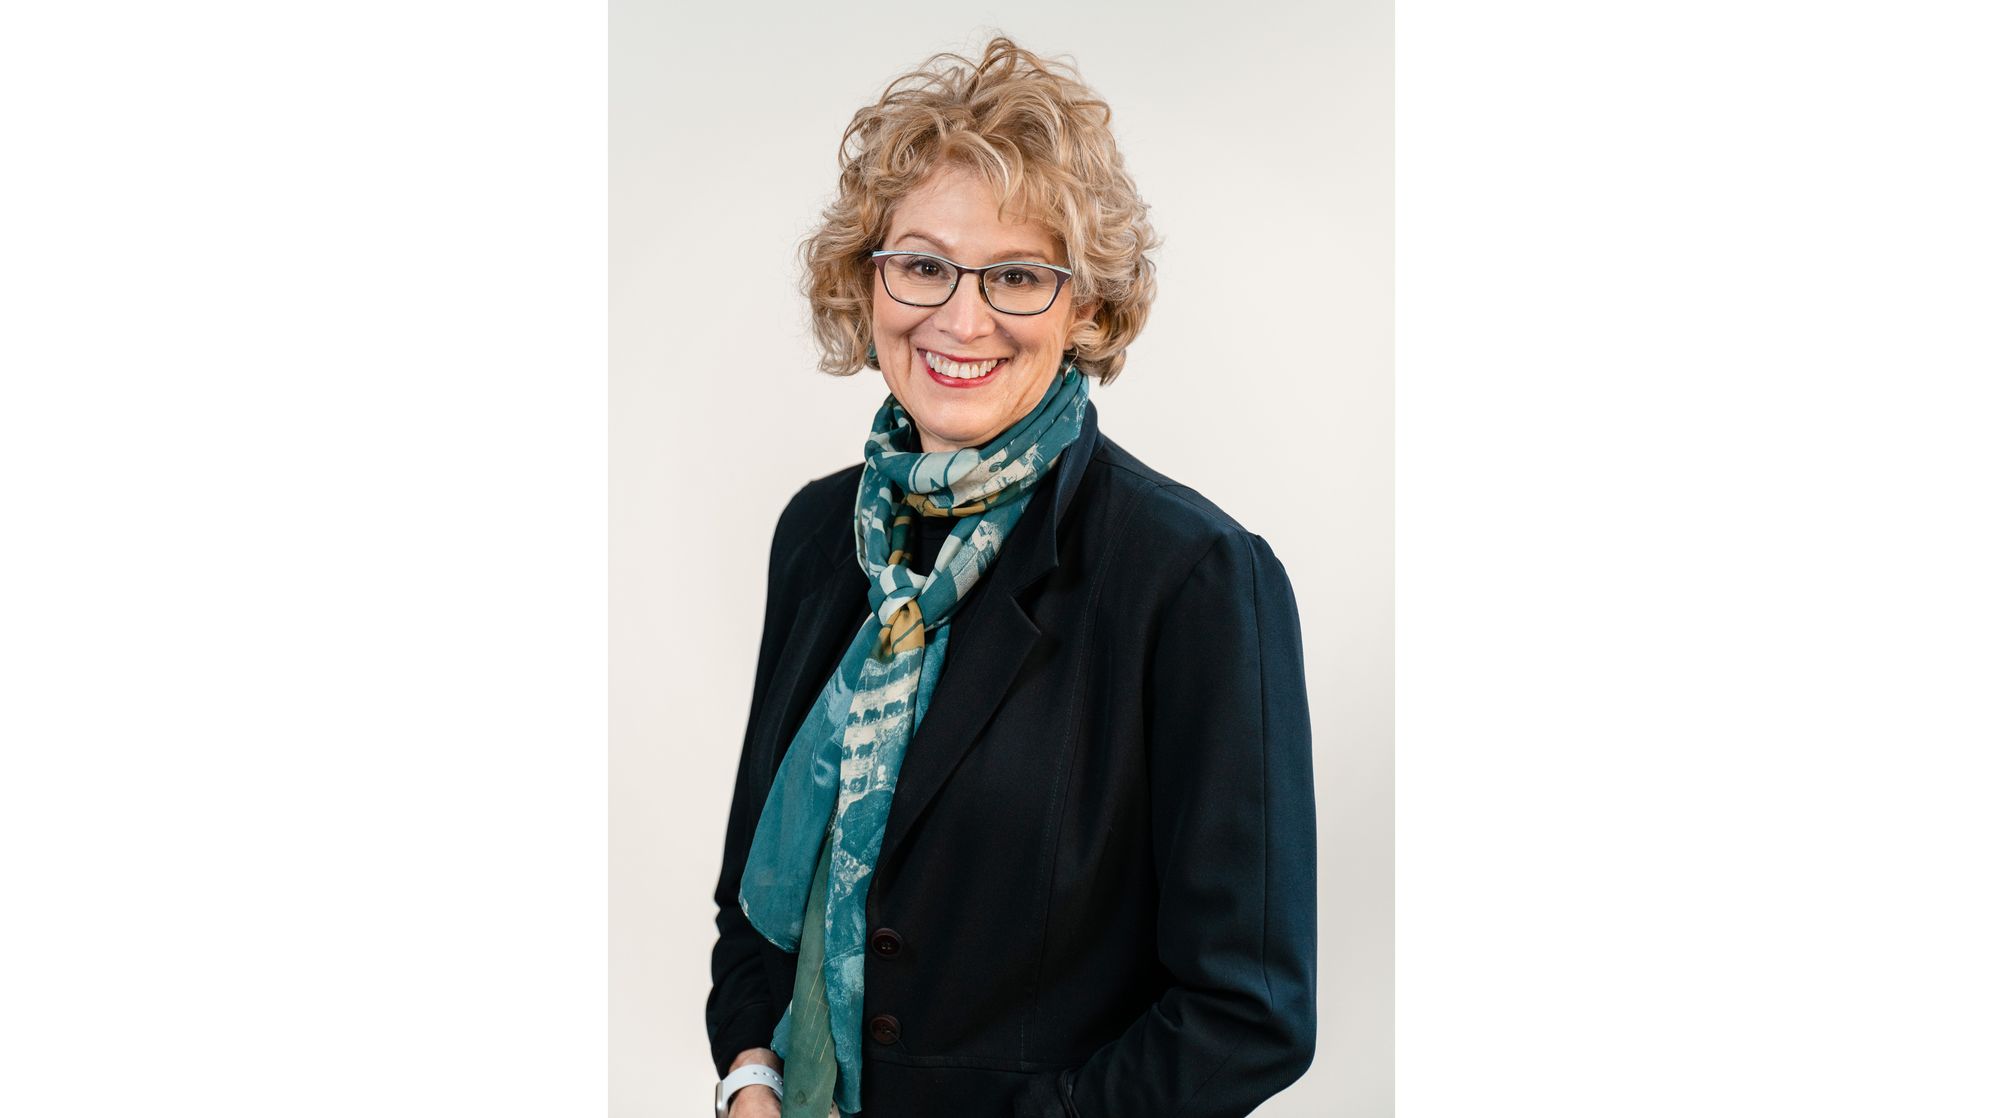 From Corporate Chains to Second Act - Judith Kurnick Coaching